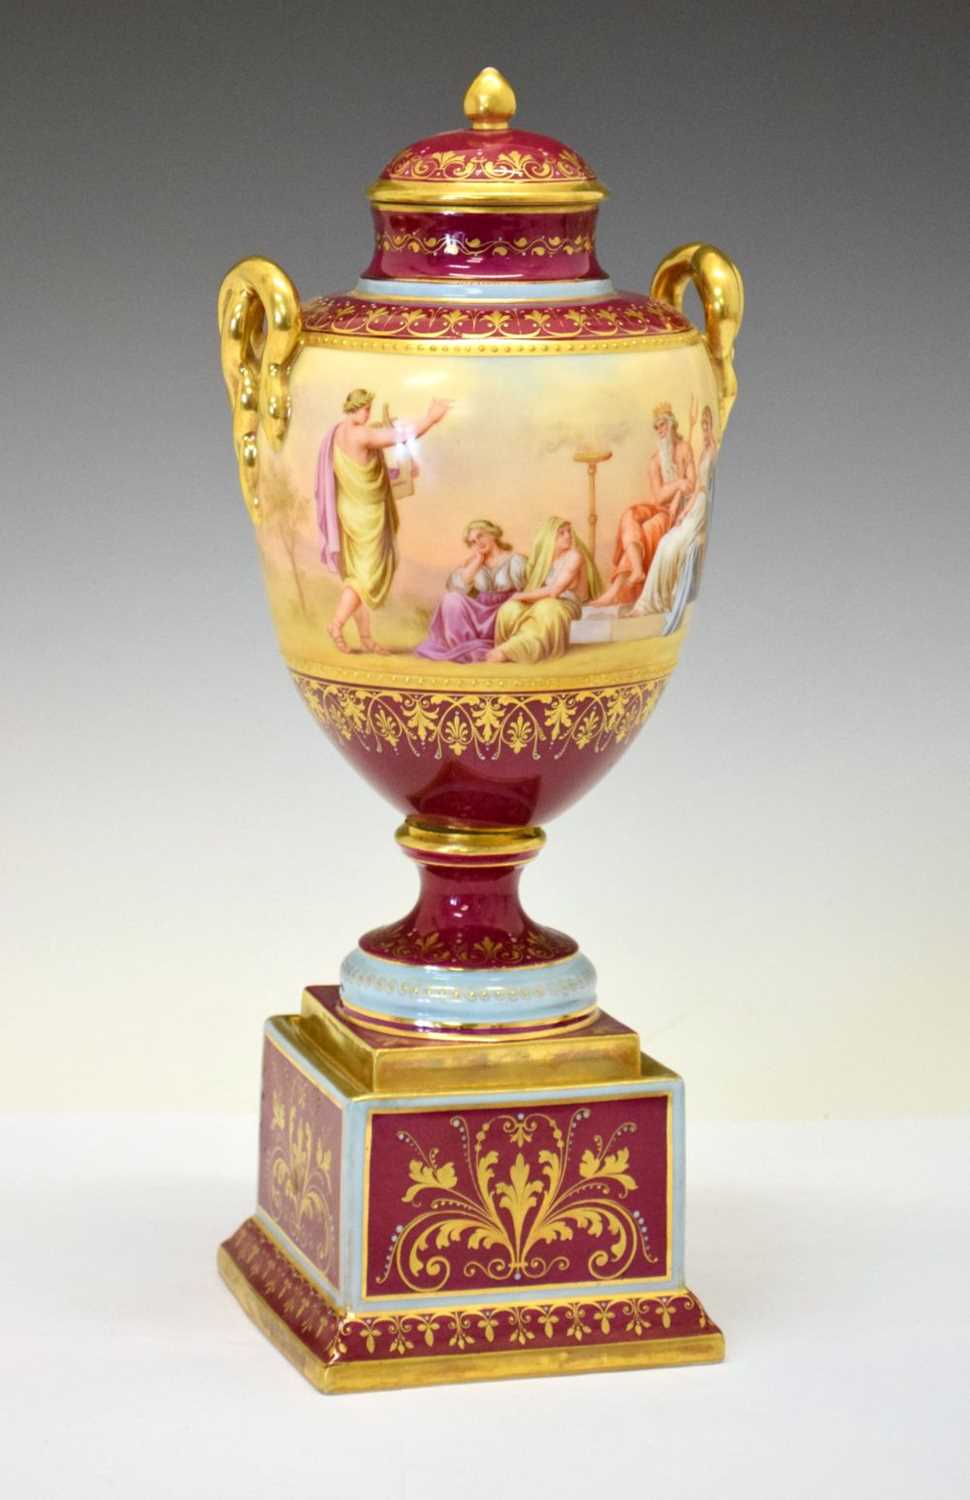 Lot 403 - Austrian porcelain covered vase and stand